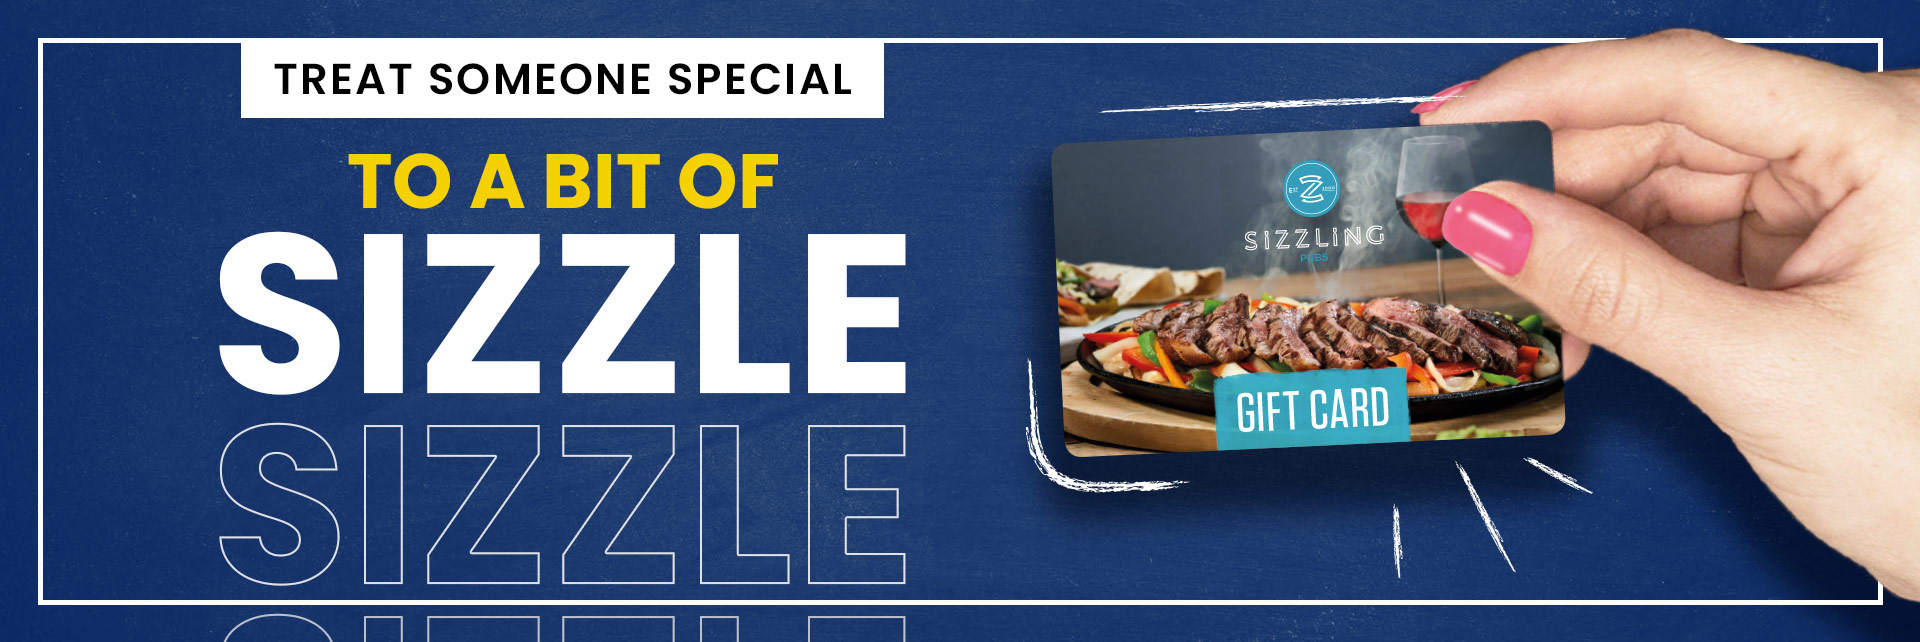 Sizzling Pubs Gift Card at Black Horse Inn in Prescot